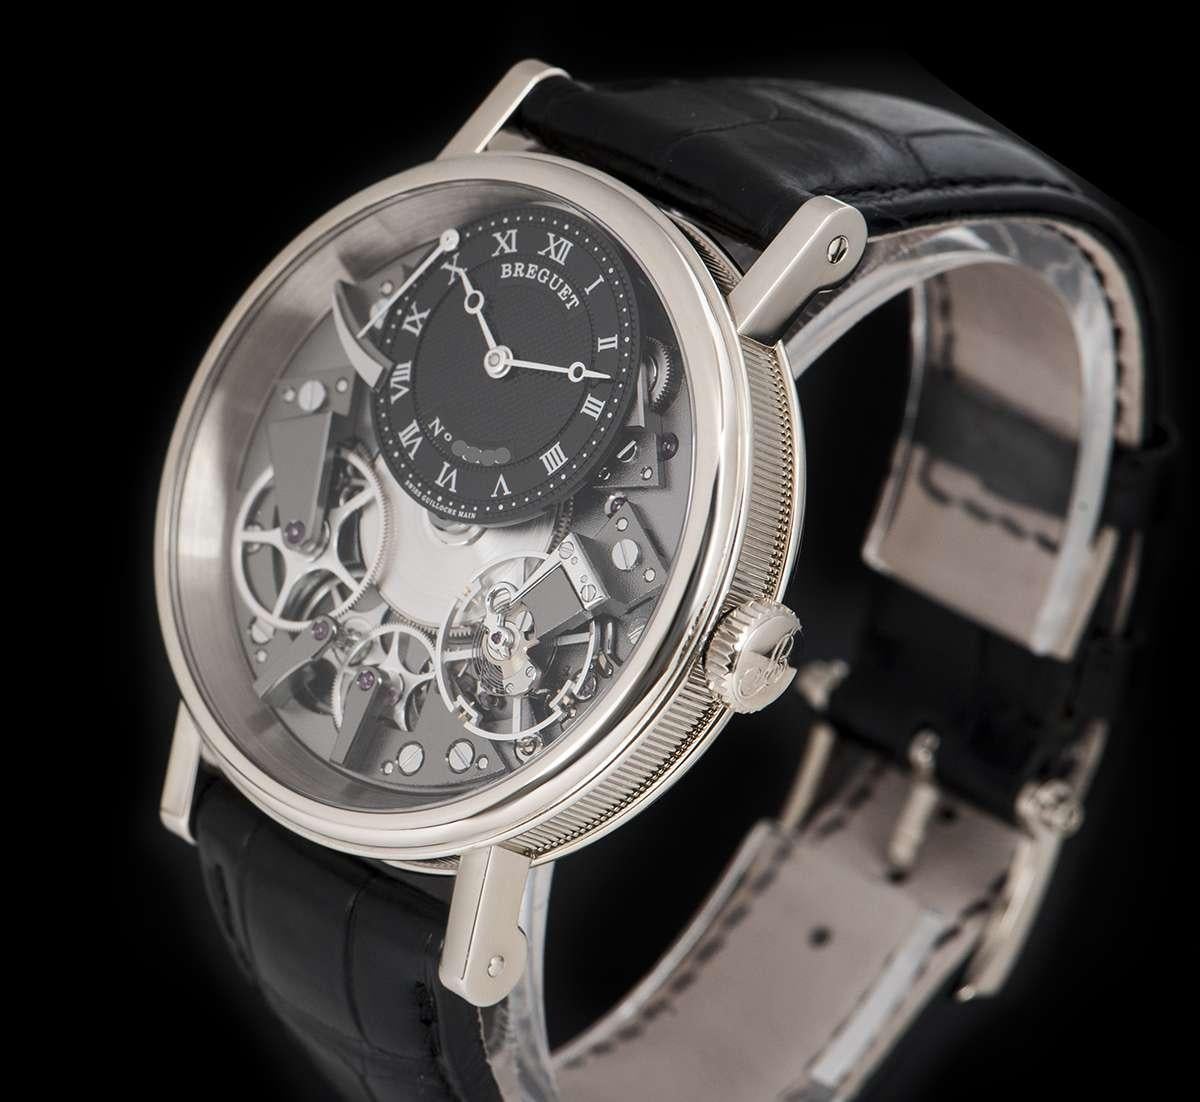 An Unworn 18 White Gold La Tradition NOS Gents Wristwatch, open worked dial with an off-centred black dial hand engraved on a rose engine with roman numerals, power reserve indicator at 11 0'clock, a fixed 18k white gold bezel, an original black